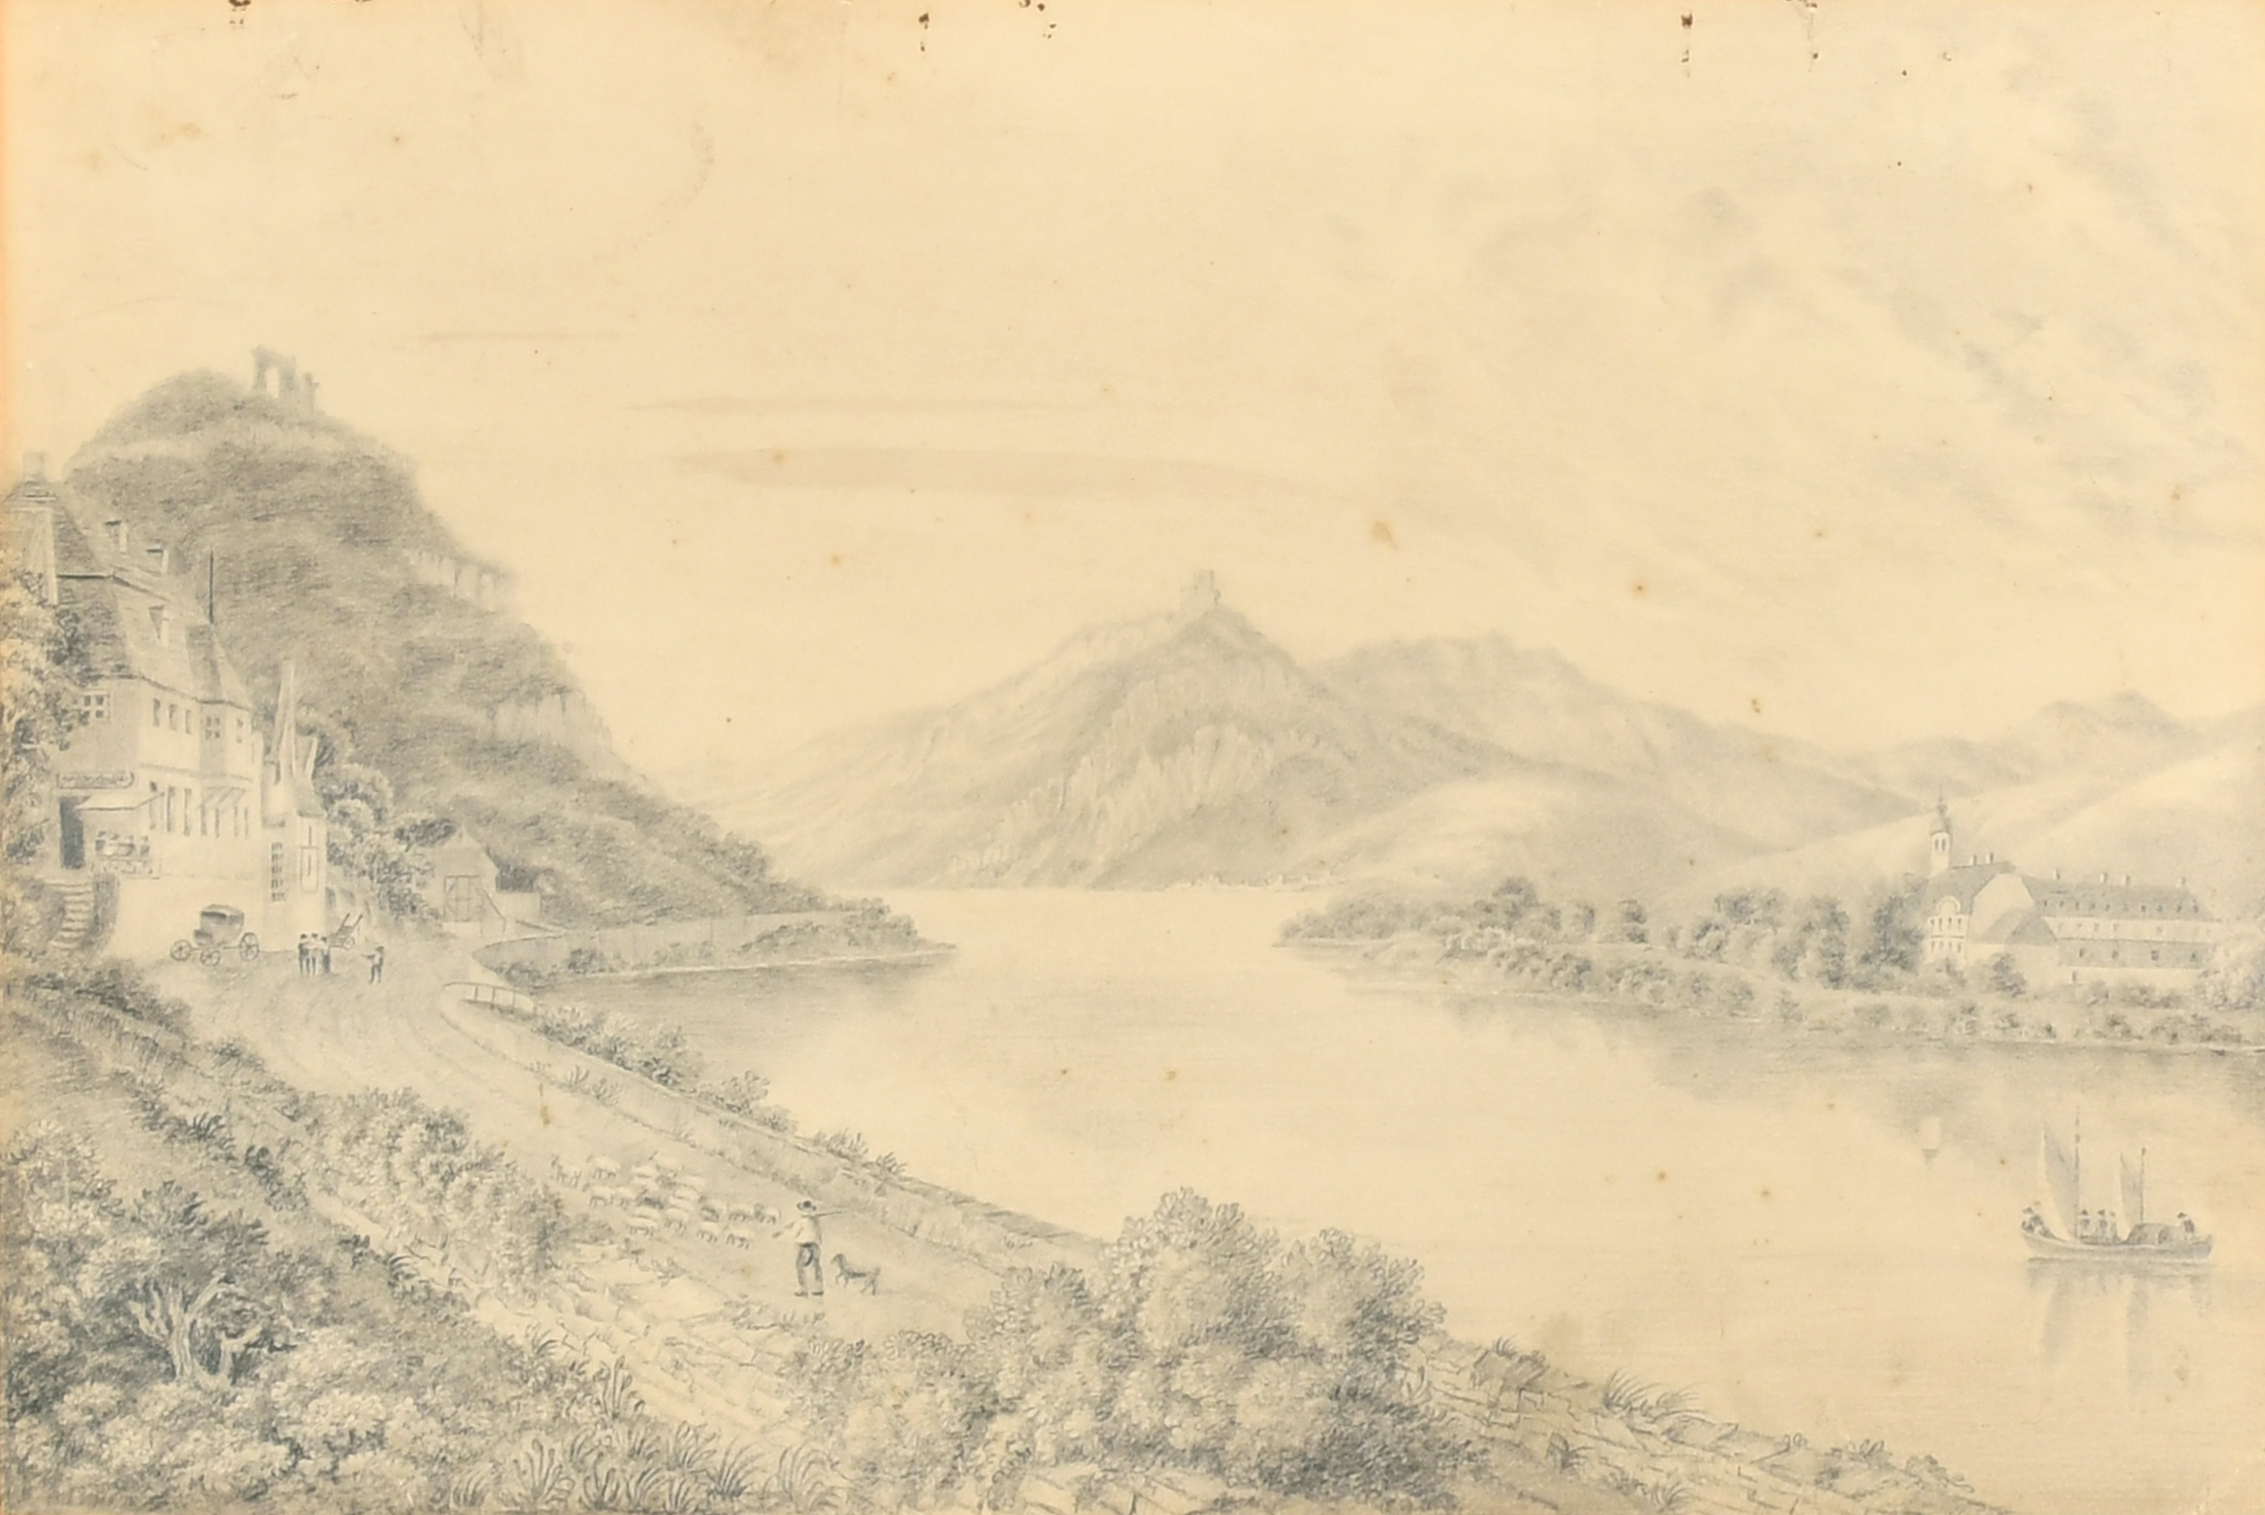 Attributed to William Tombleson (1795-1846) British. "Rolandeck", Pencil, Inscribed on the mount,